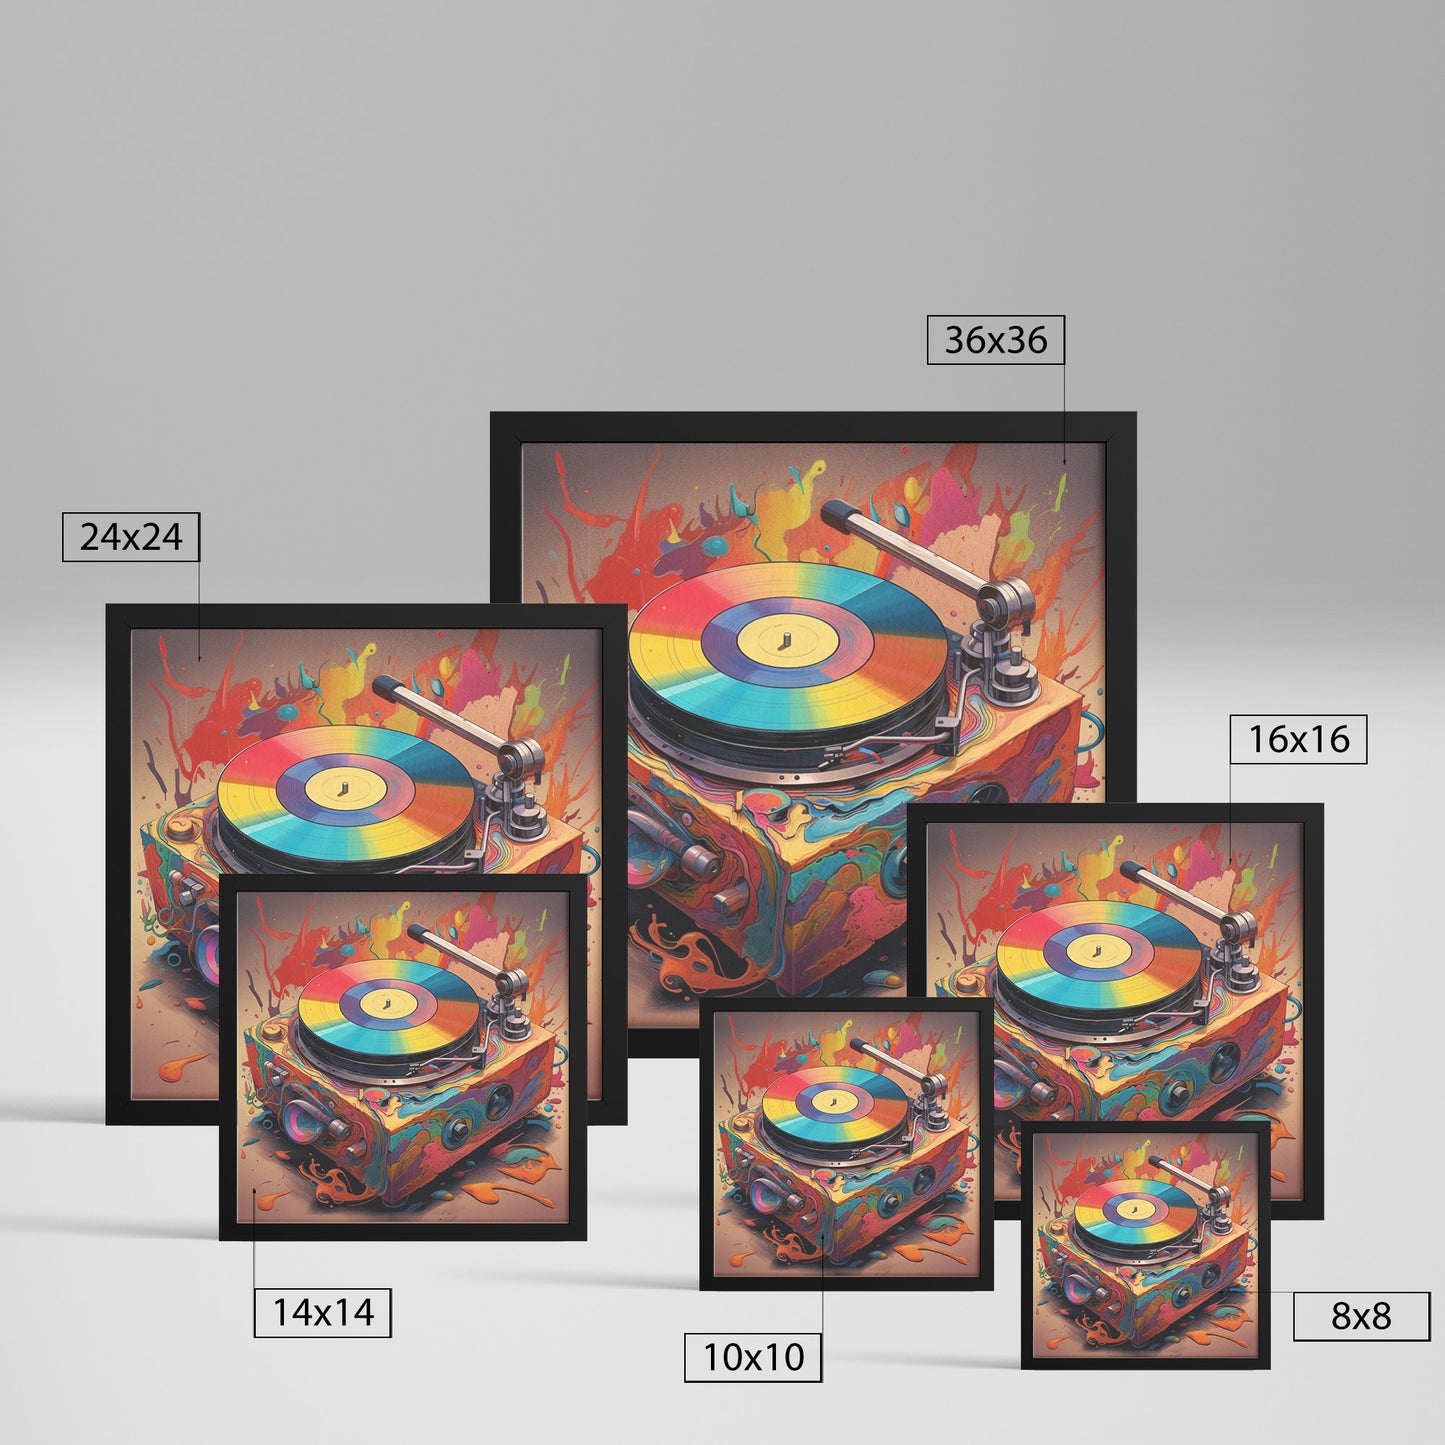 Groovy Graphics: The Turntable Tapestry